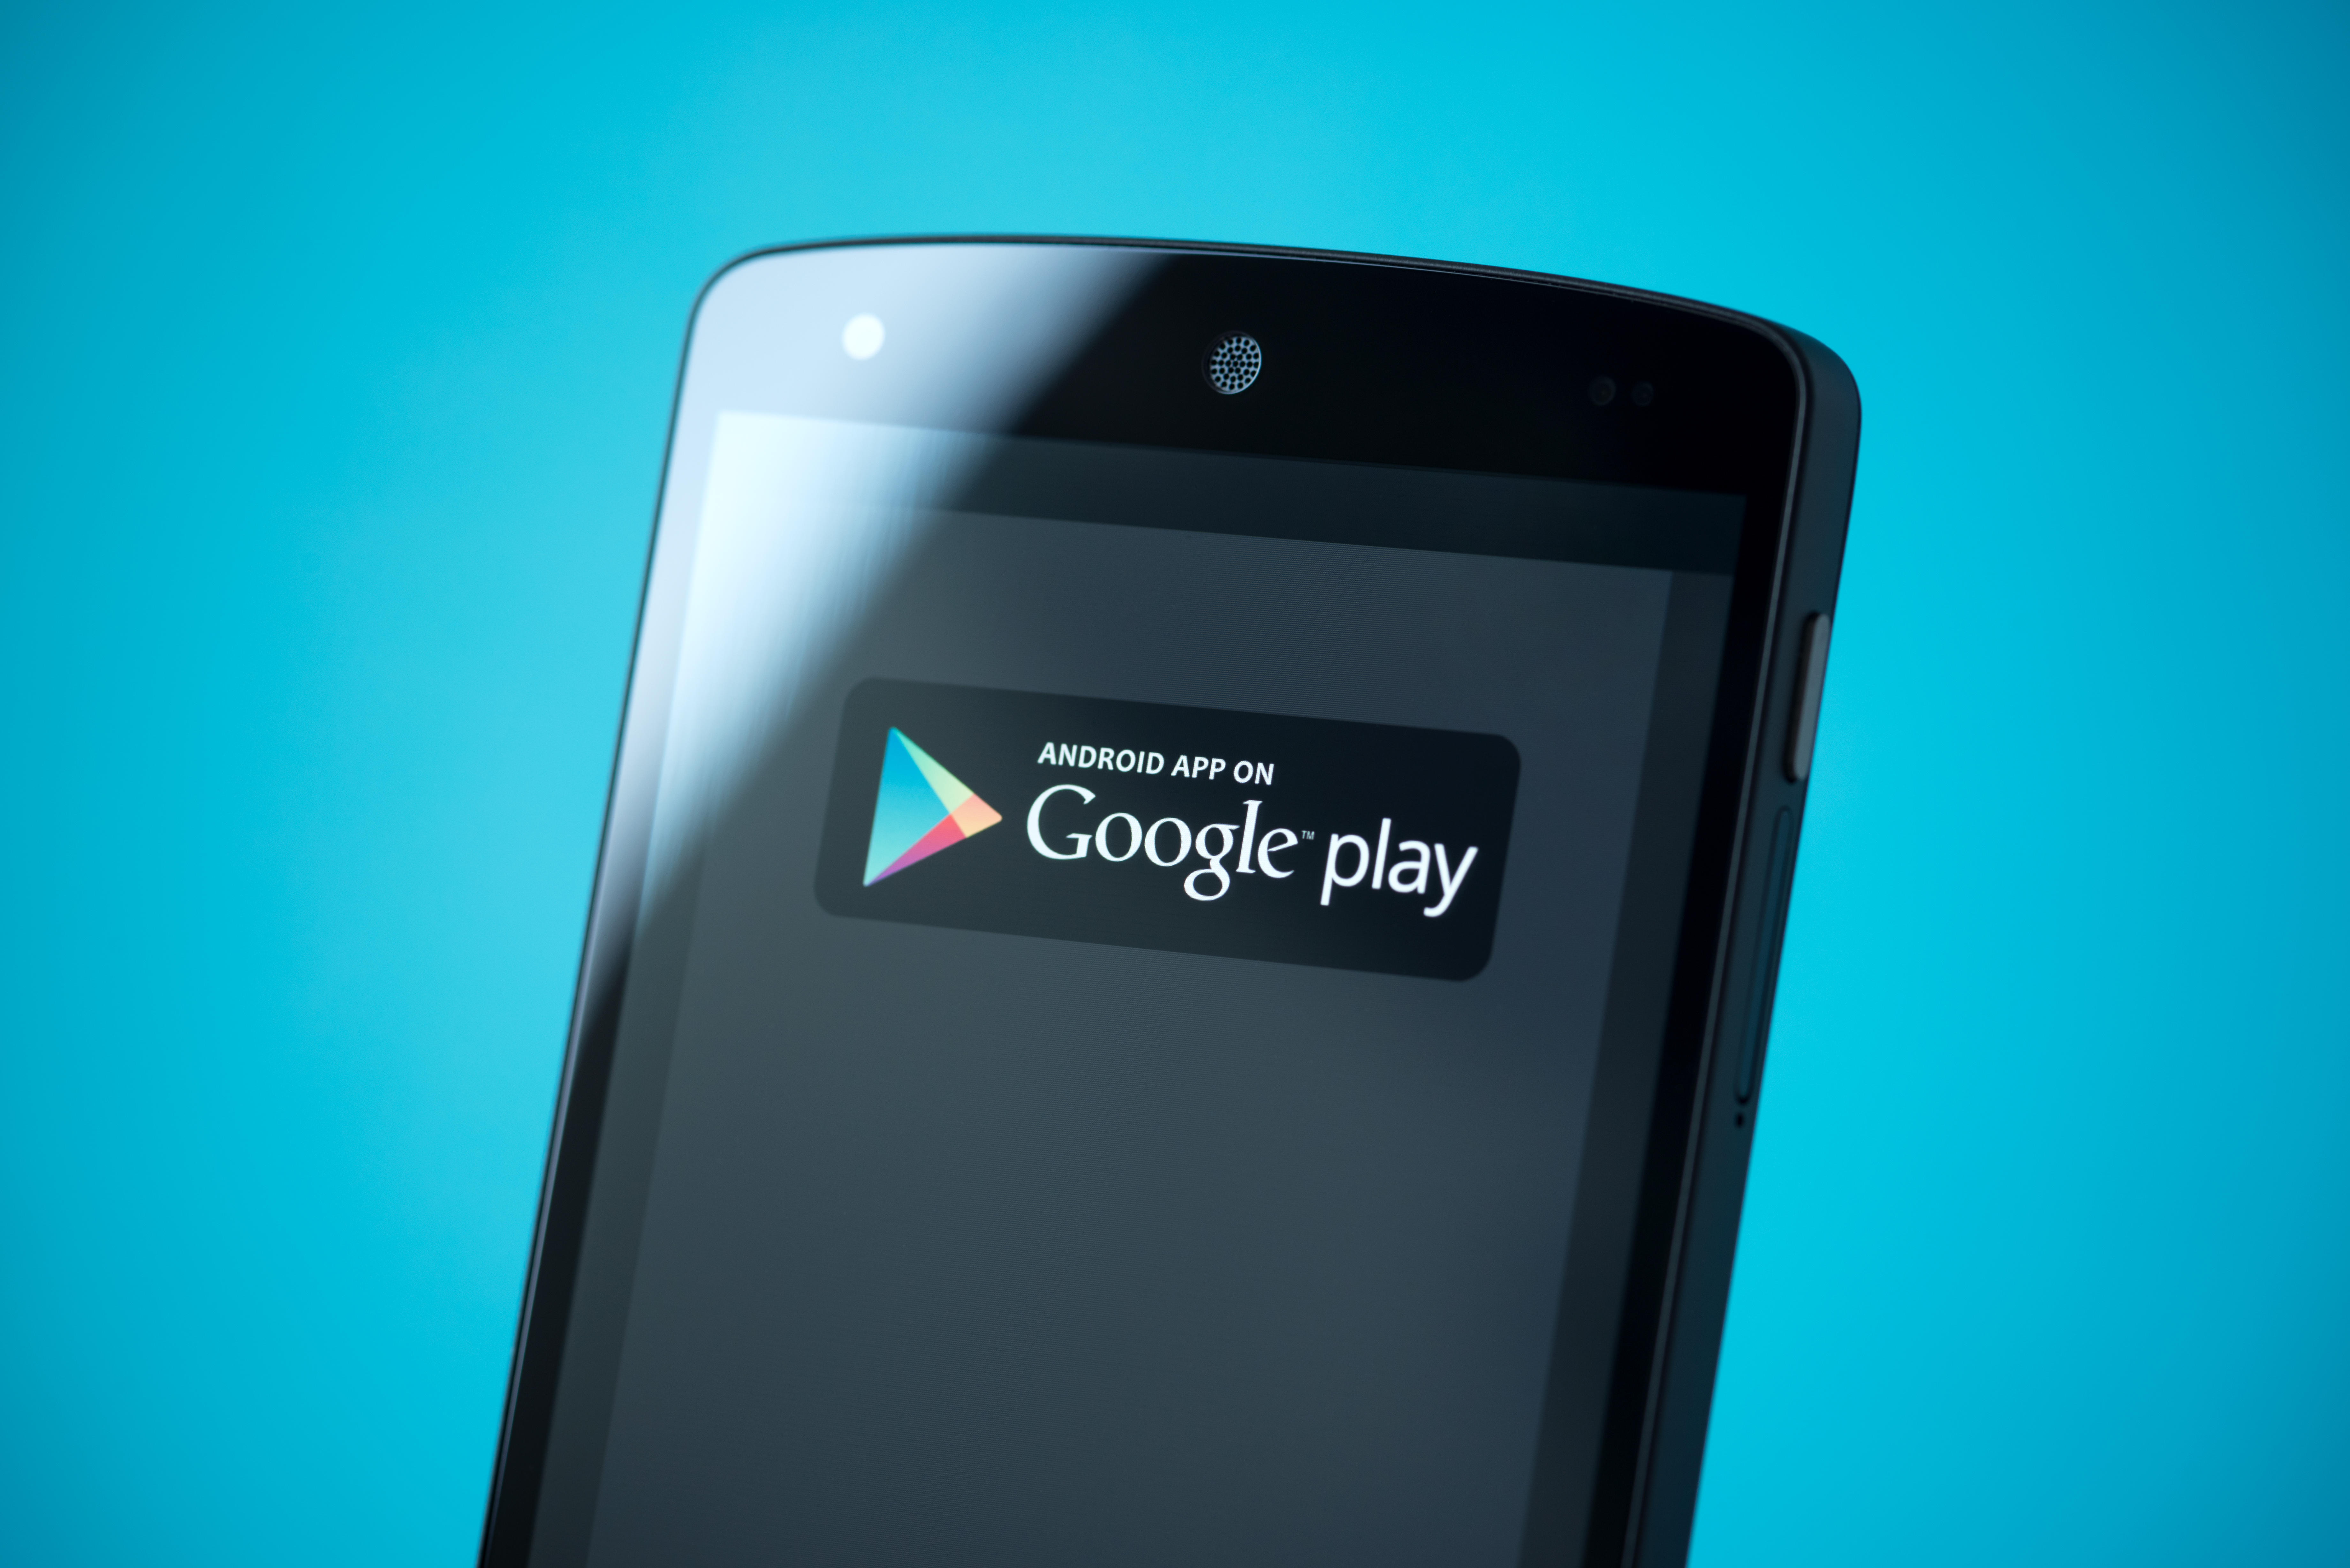 Google Play Used to Spread 'Patchwork' APT's Espionage Apps